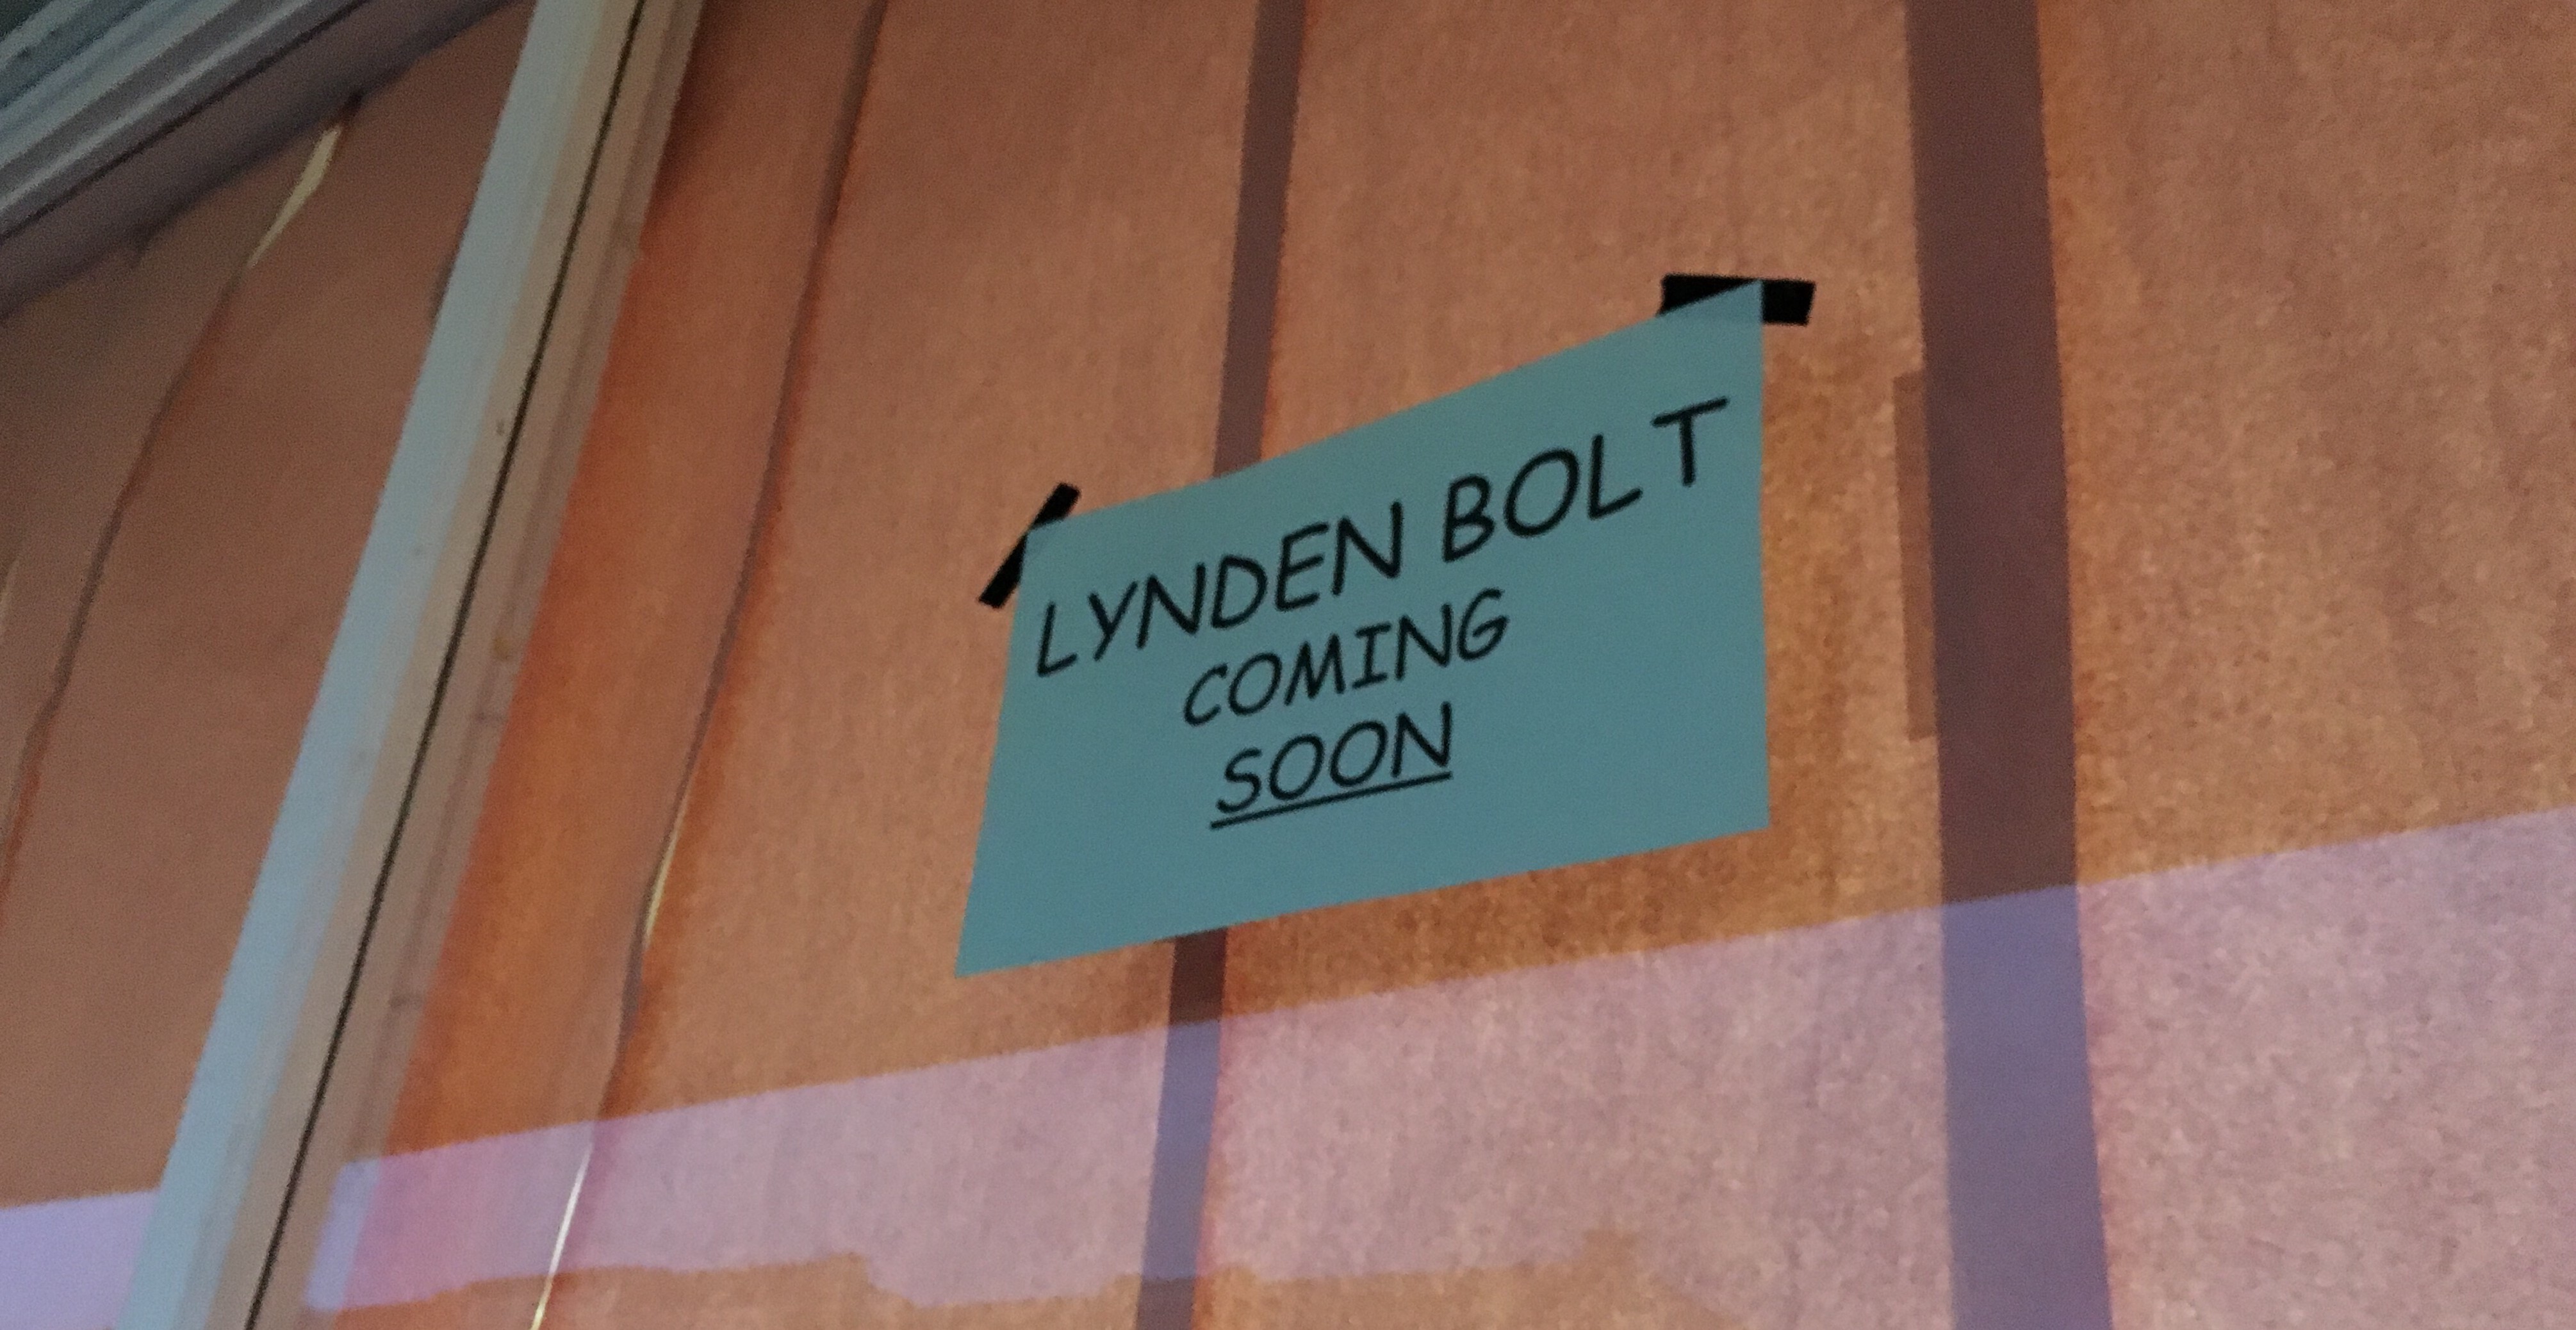 Lynden Bolt: specialty fasteners & more coming soon to downtown Lynden